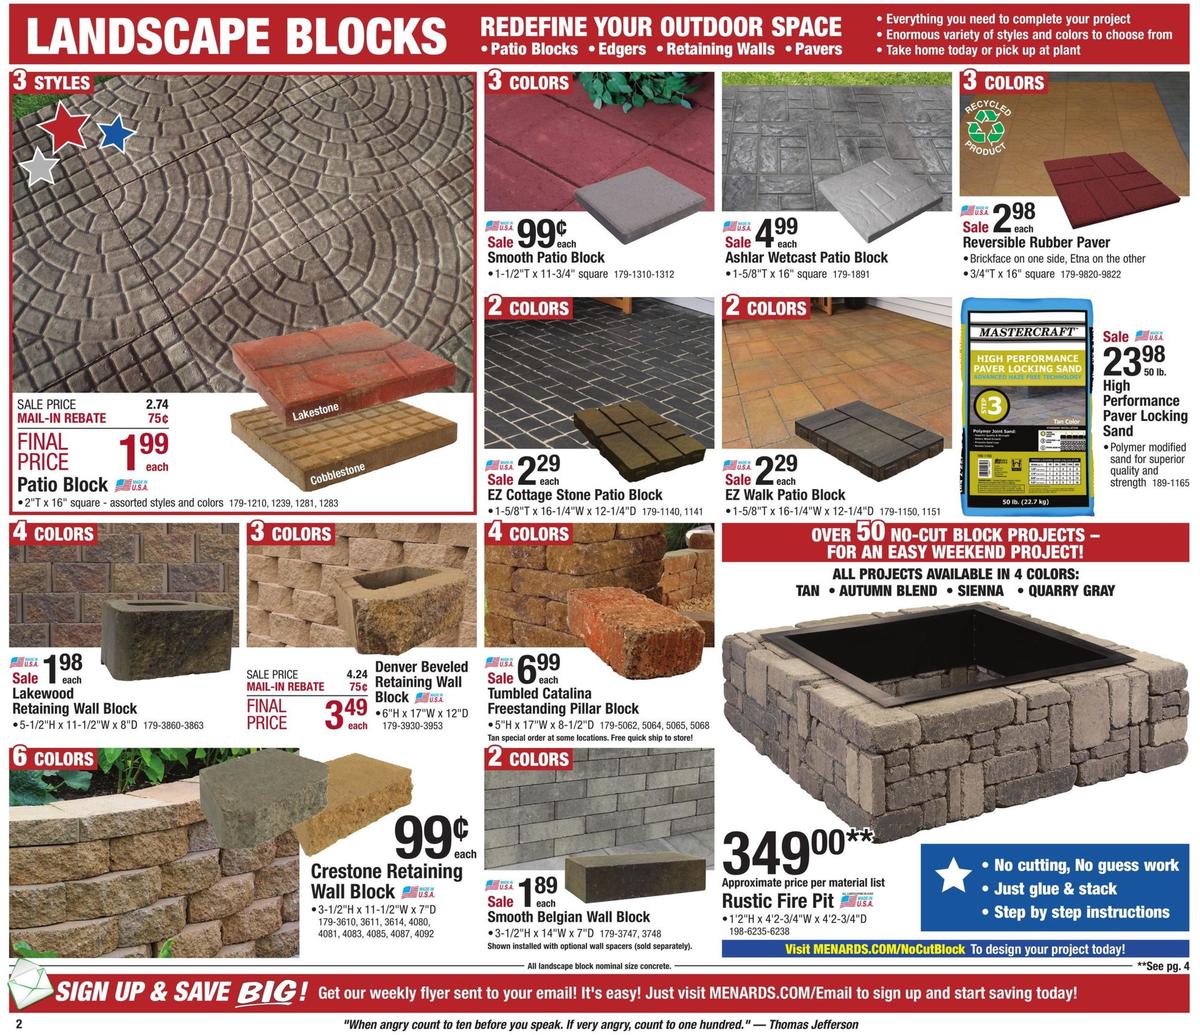 Menards Weekly Ad from June 23